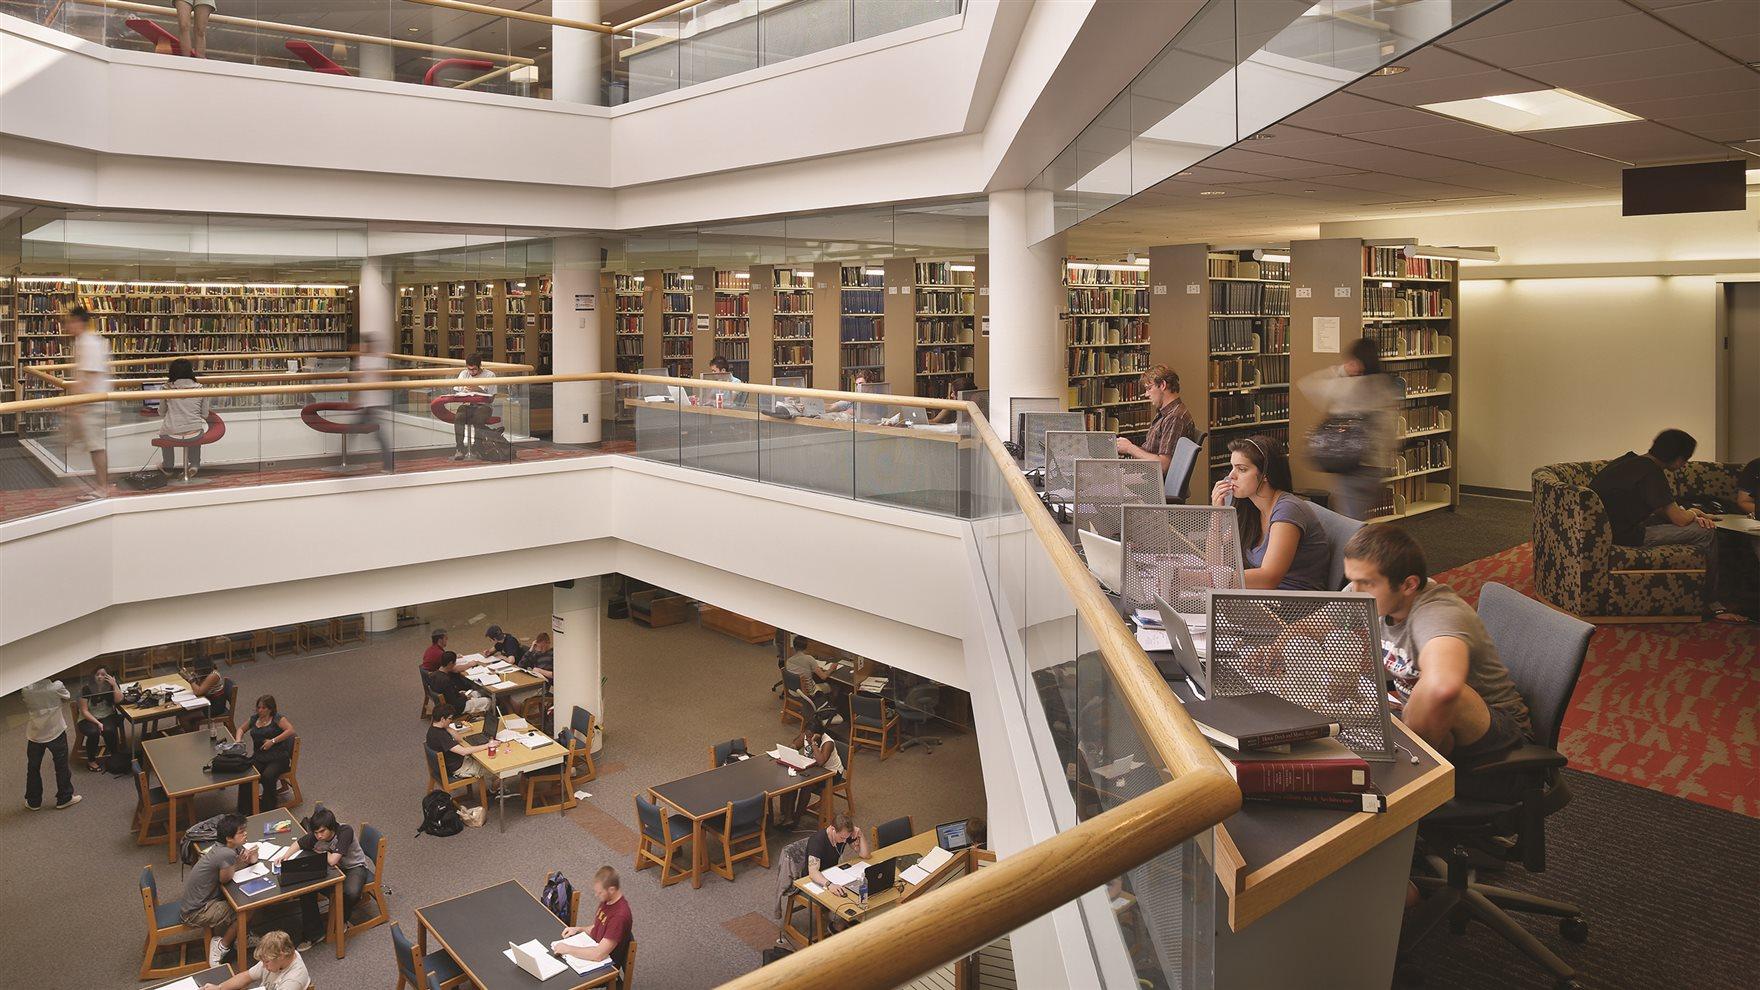 interior of Haggarty Library with students studying at tables, bookshelves